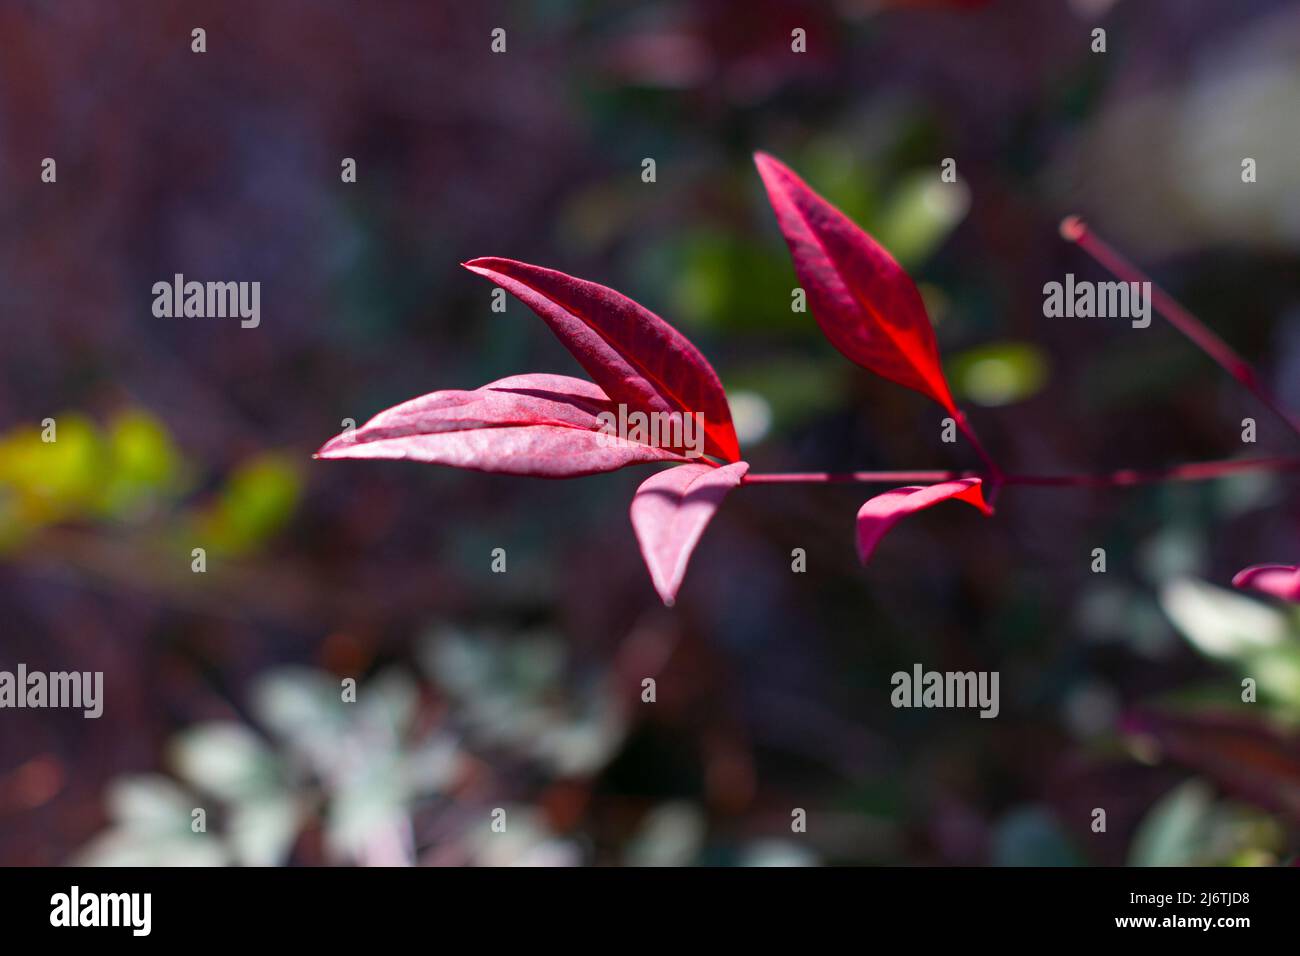 Red leaves of the Ternstroemia gymnanthera also known as Cleyera japonica or Sakaki in Japanese. Stock Photo